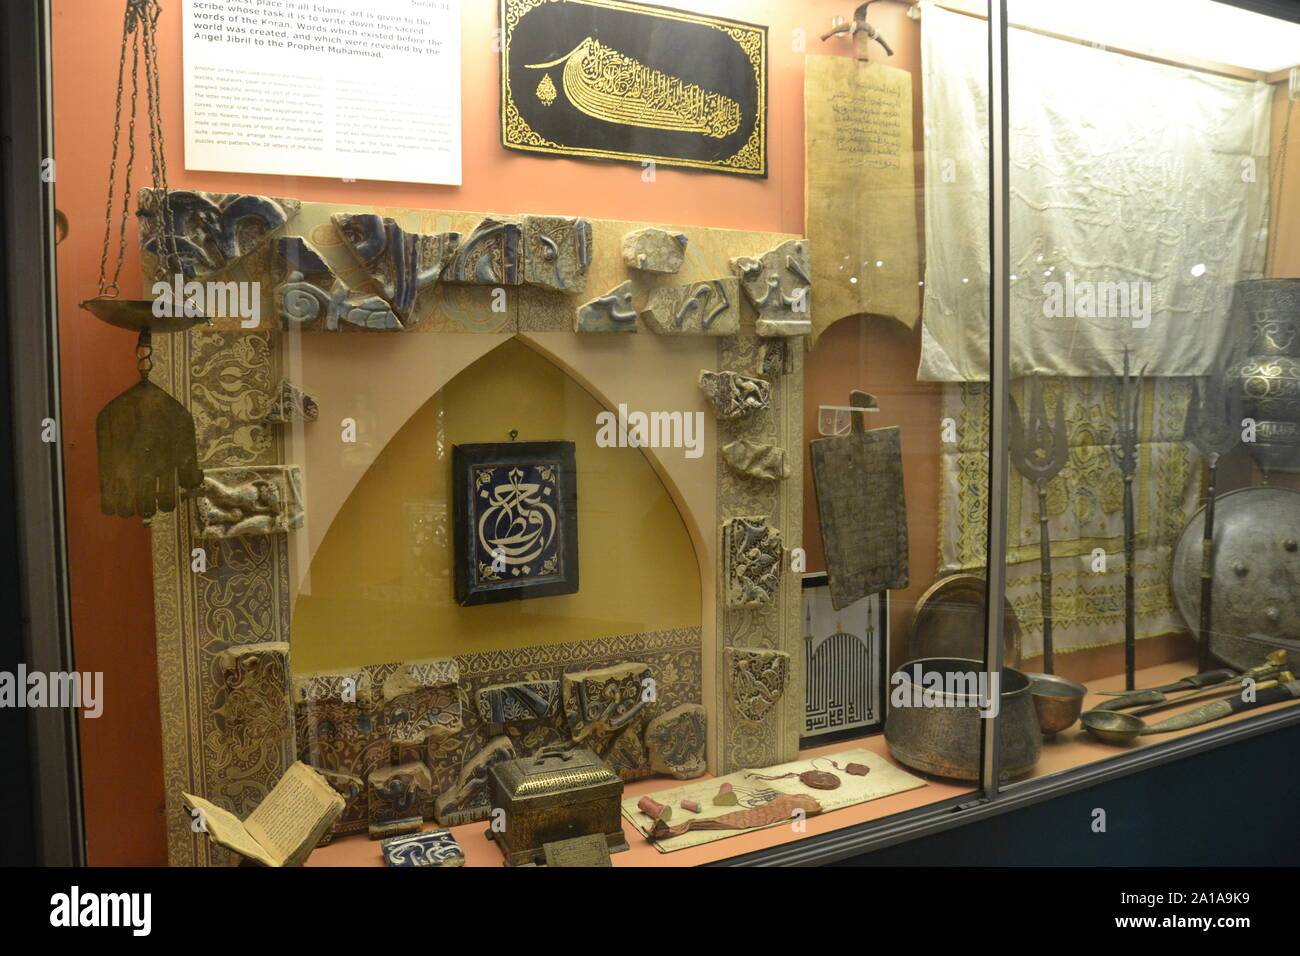 Islam in the World Cultures Gallery, Ipswich Museum, Ipswich, Suffolk, UK. A Victorian building with a collection of fascinating displays. Stock Photo